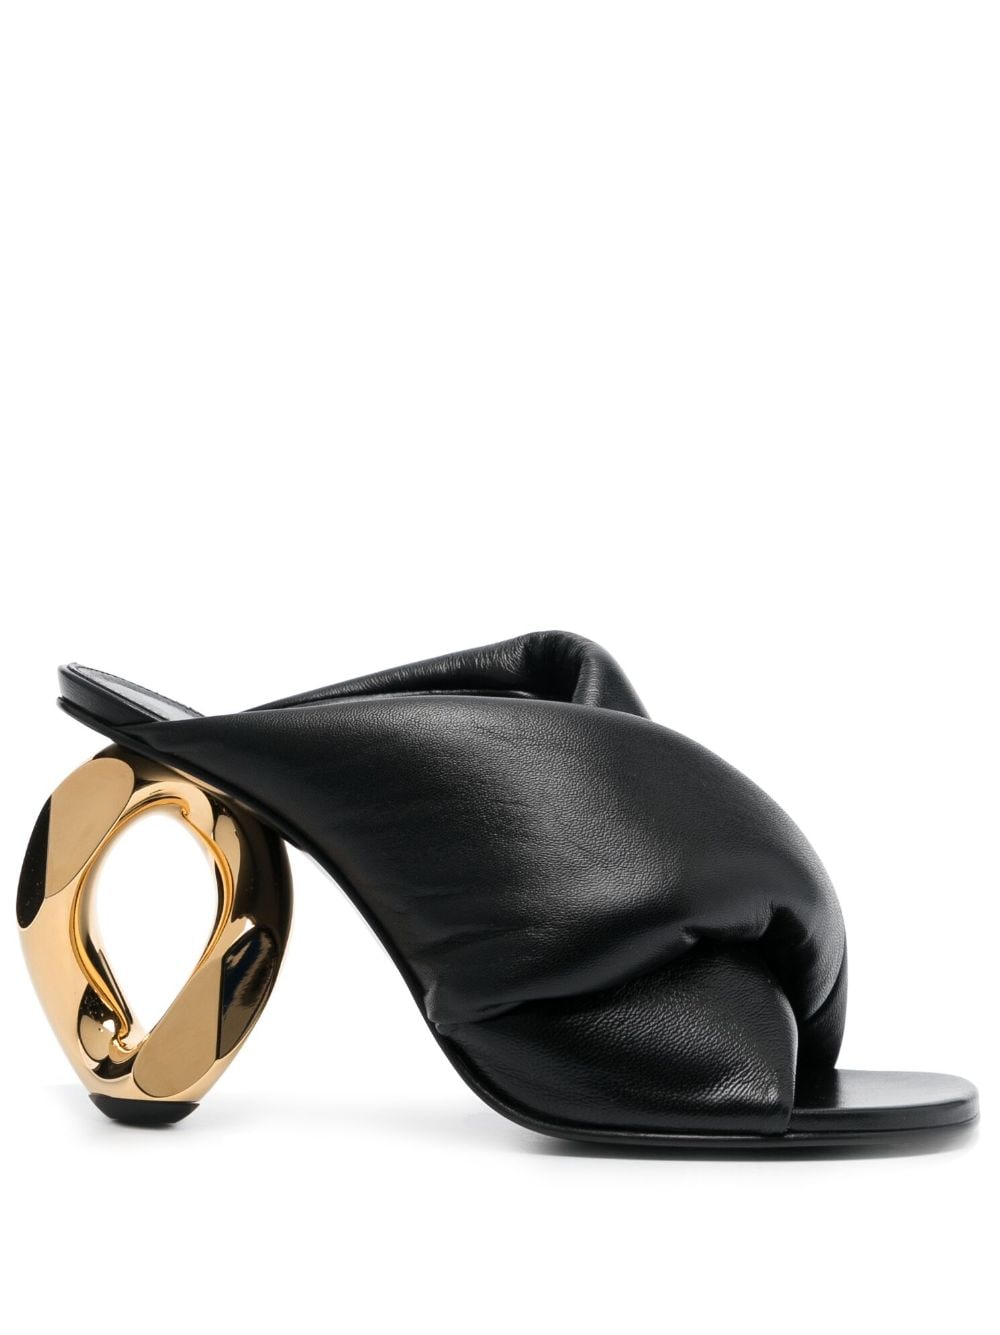 JW Anderson Chain Heel 95mm leather mules - Black